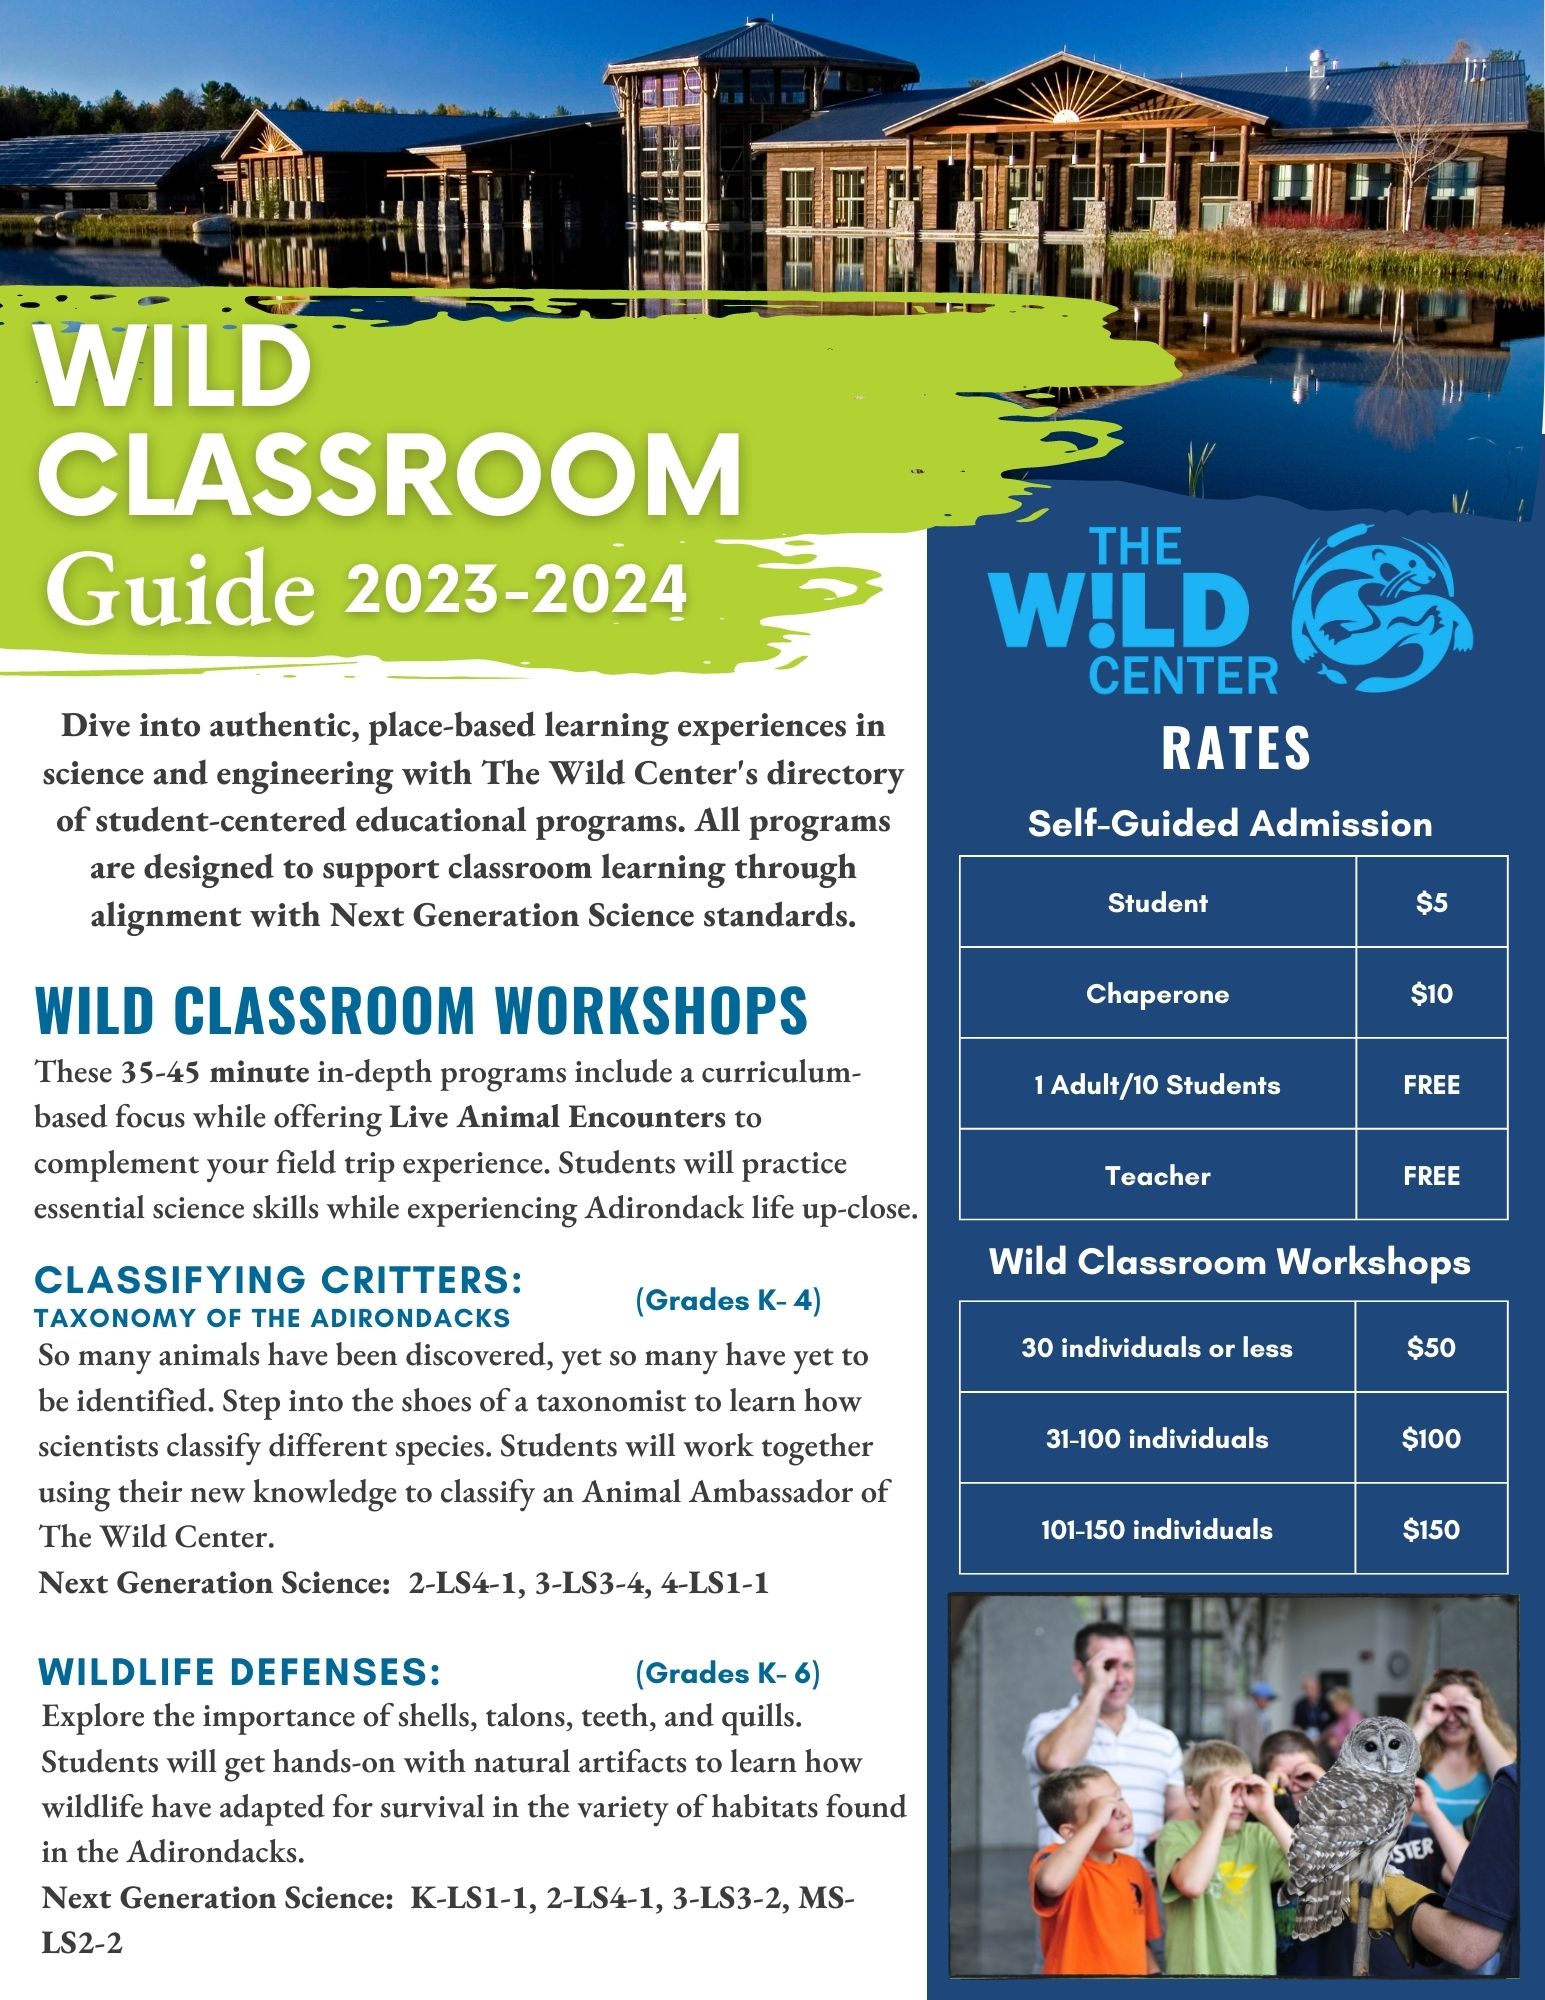 The Wild Classroom guide for 2023-24